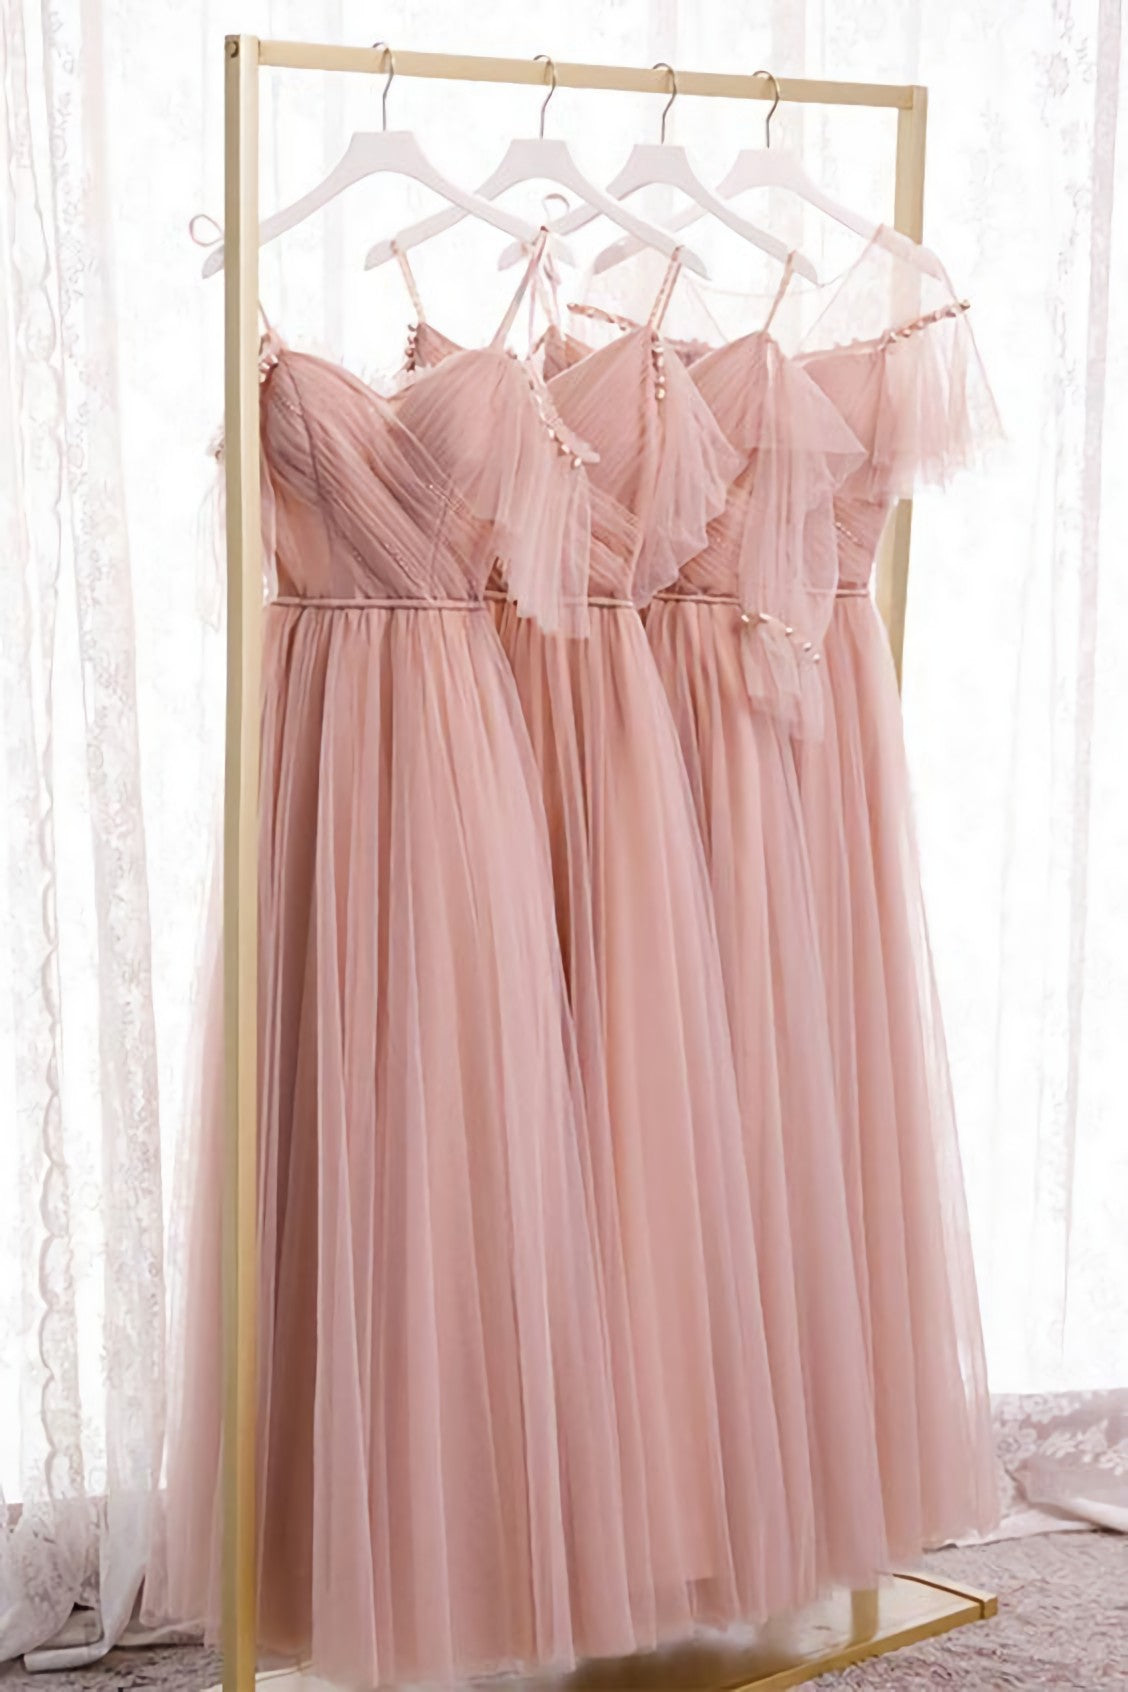 Homecoming Dresses Red, Blush Pink Tulle Long Bridesmaid Dresses, Prom Dress, Evening Dresses